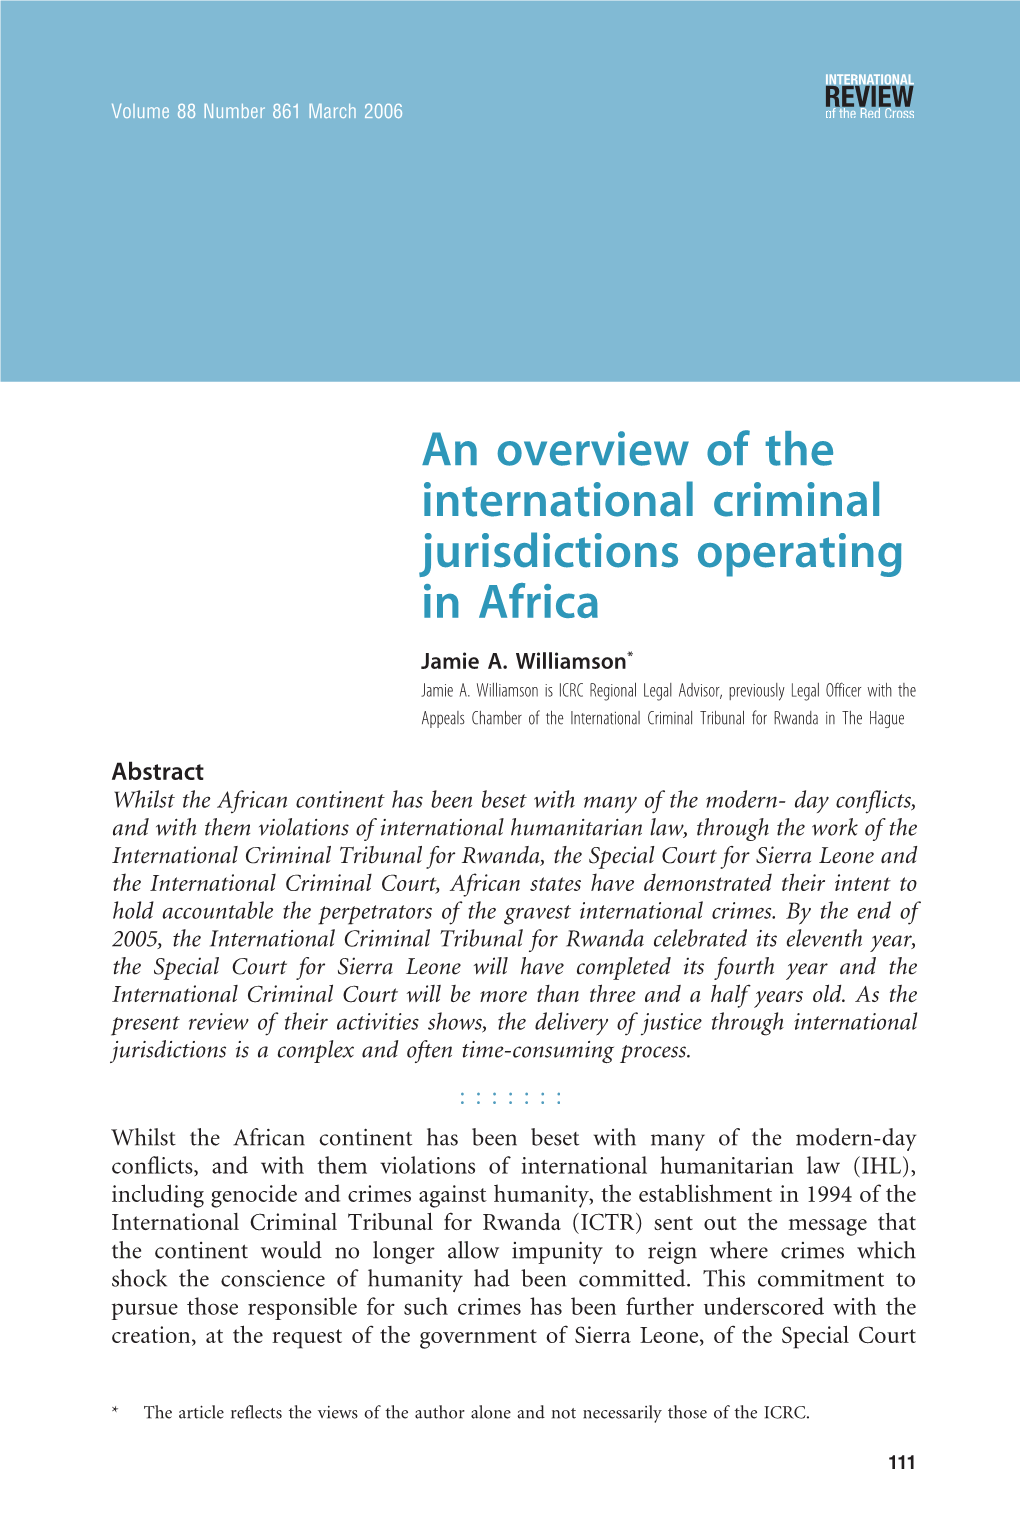 An Overview of the International Criminal Jurisdictions Operating in Africa Jamie A